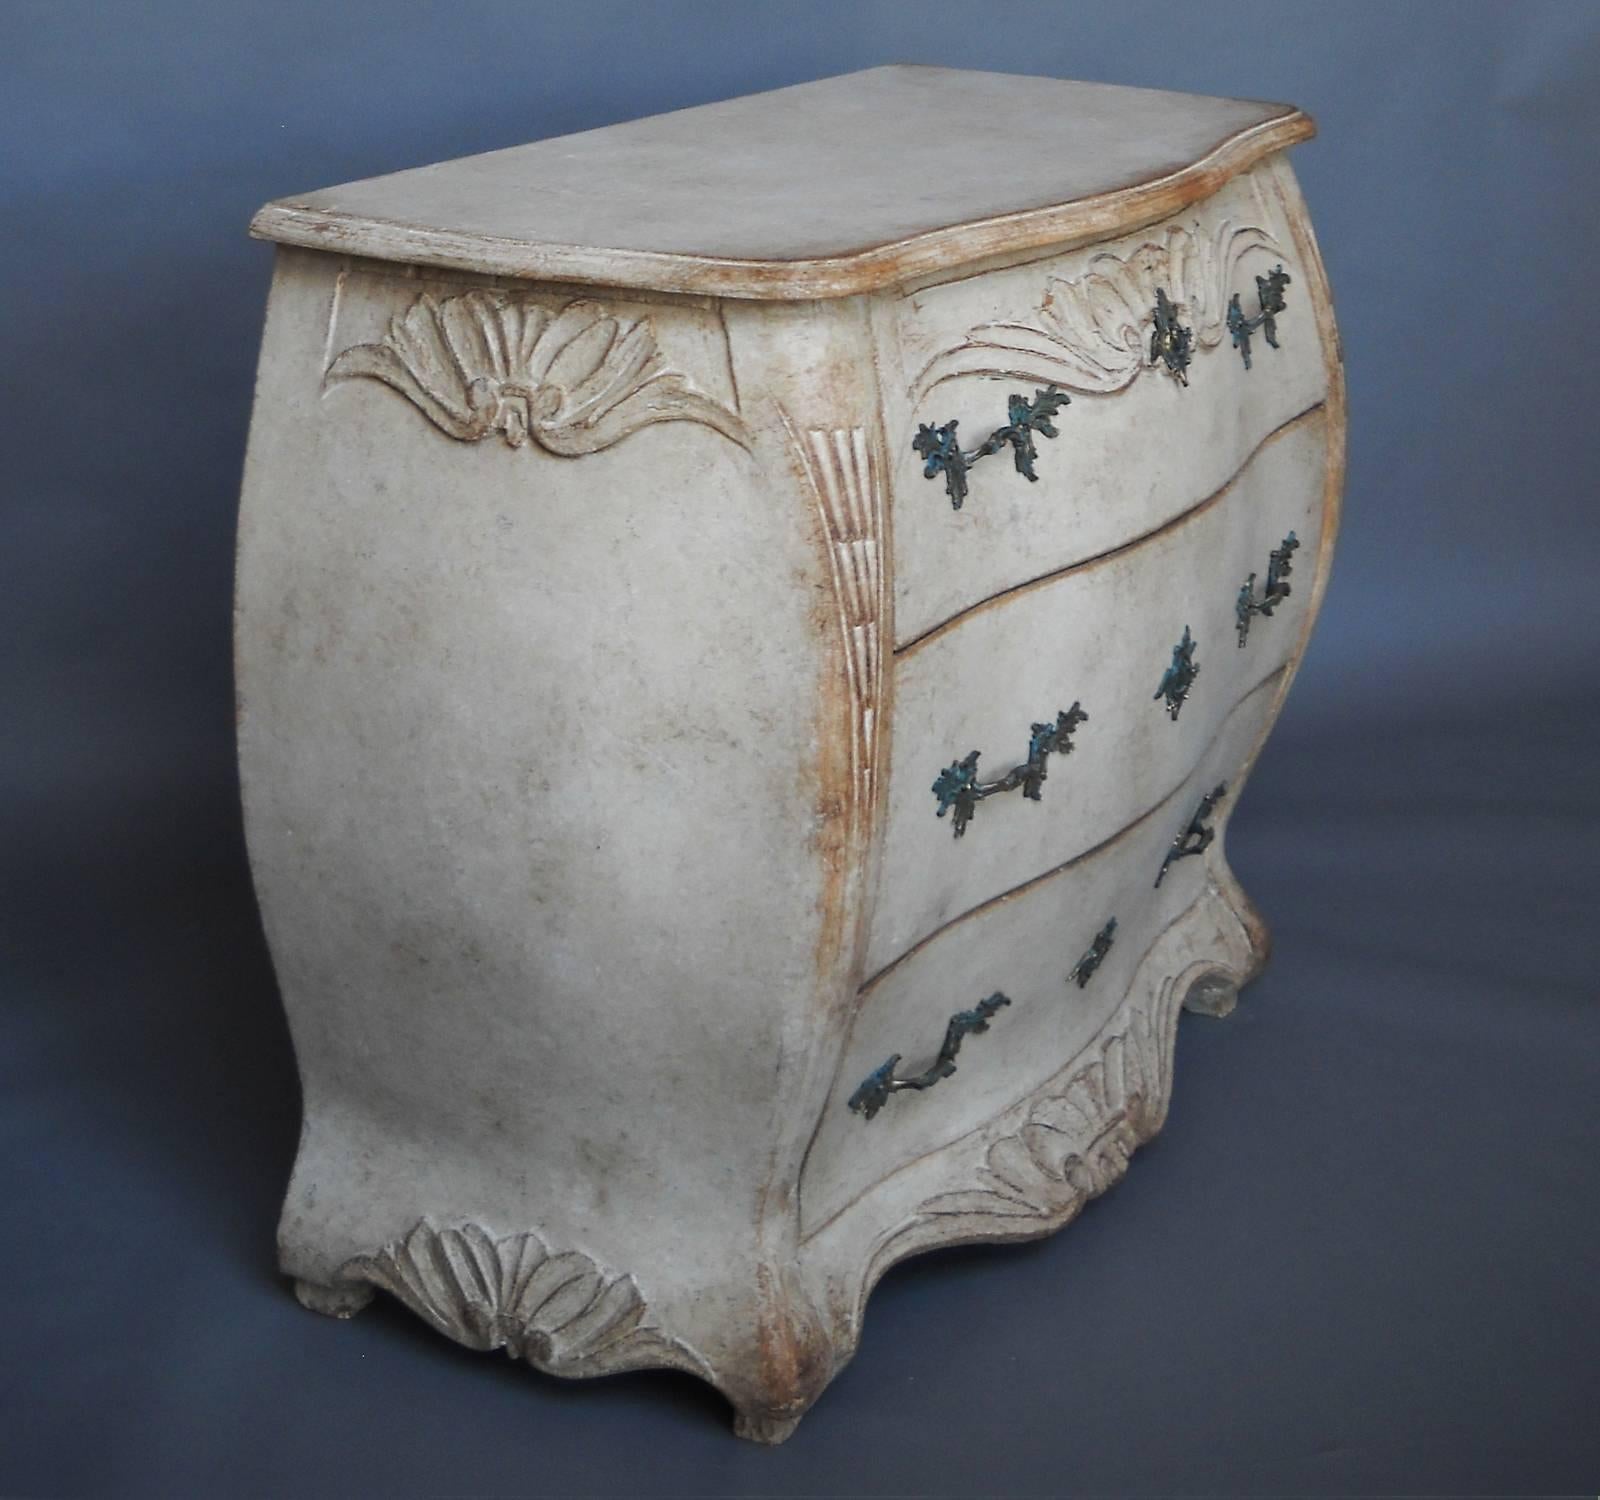 Chest of three drawers, Sweden, circa 1860, with bombé form and carved detail. A beautiful piece.